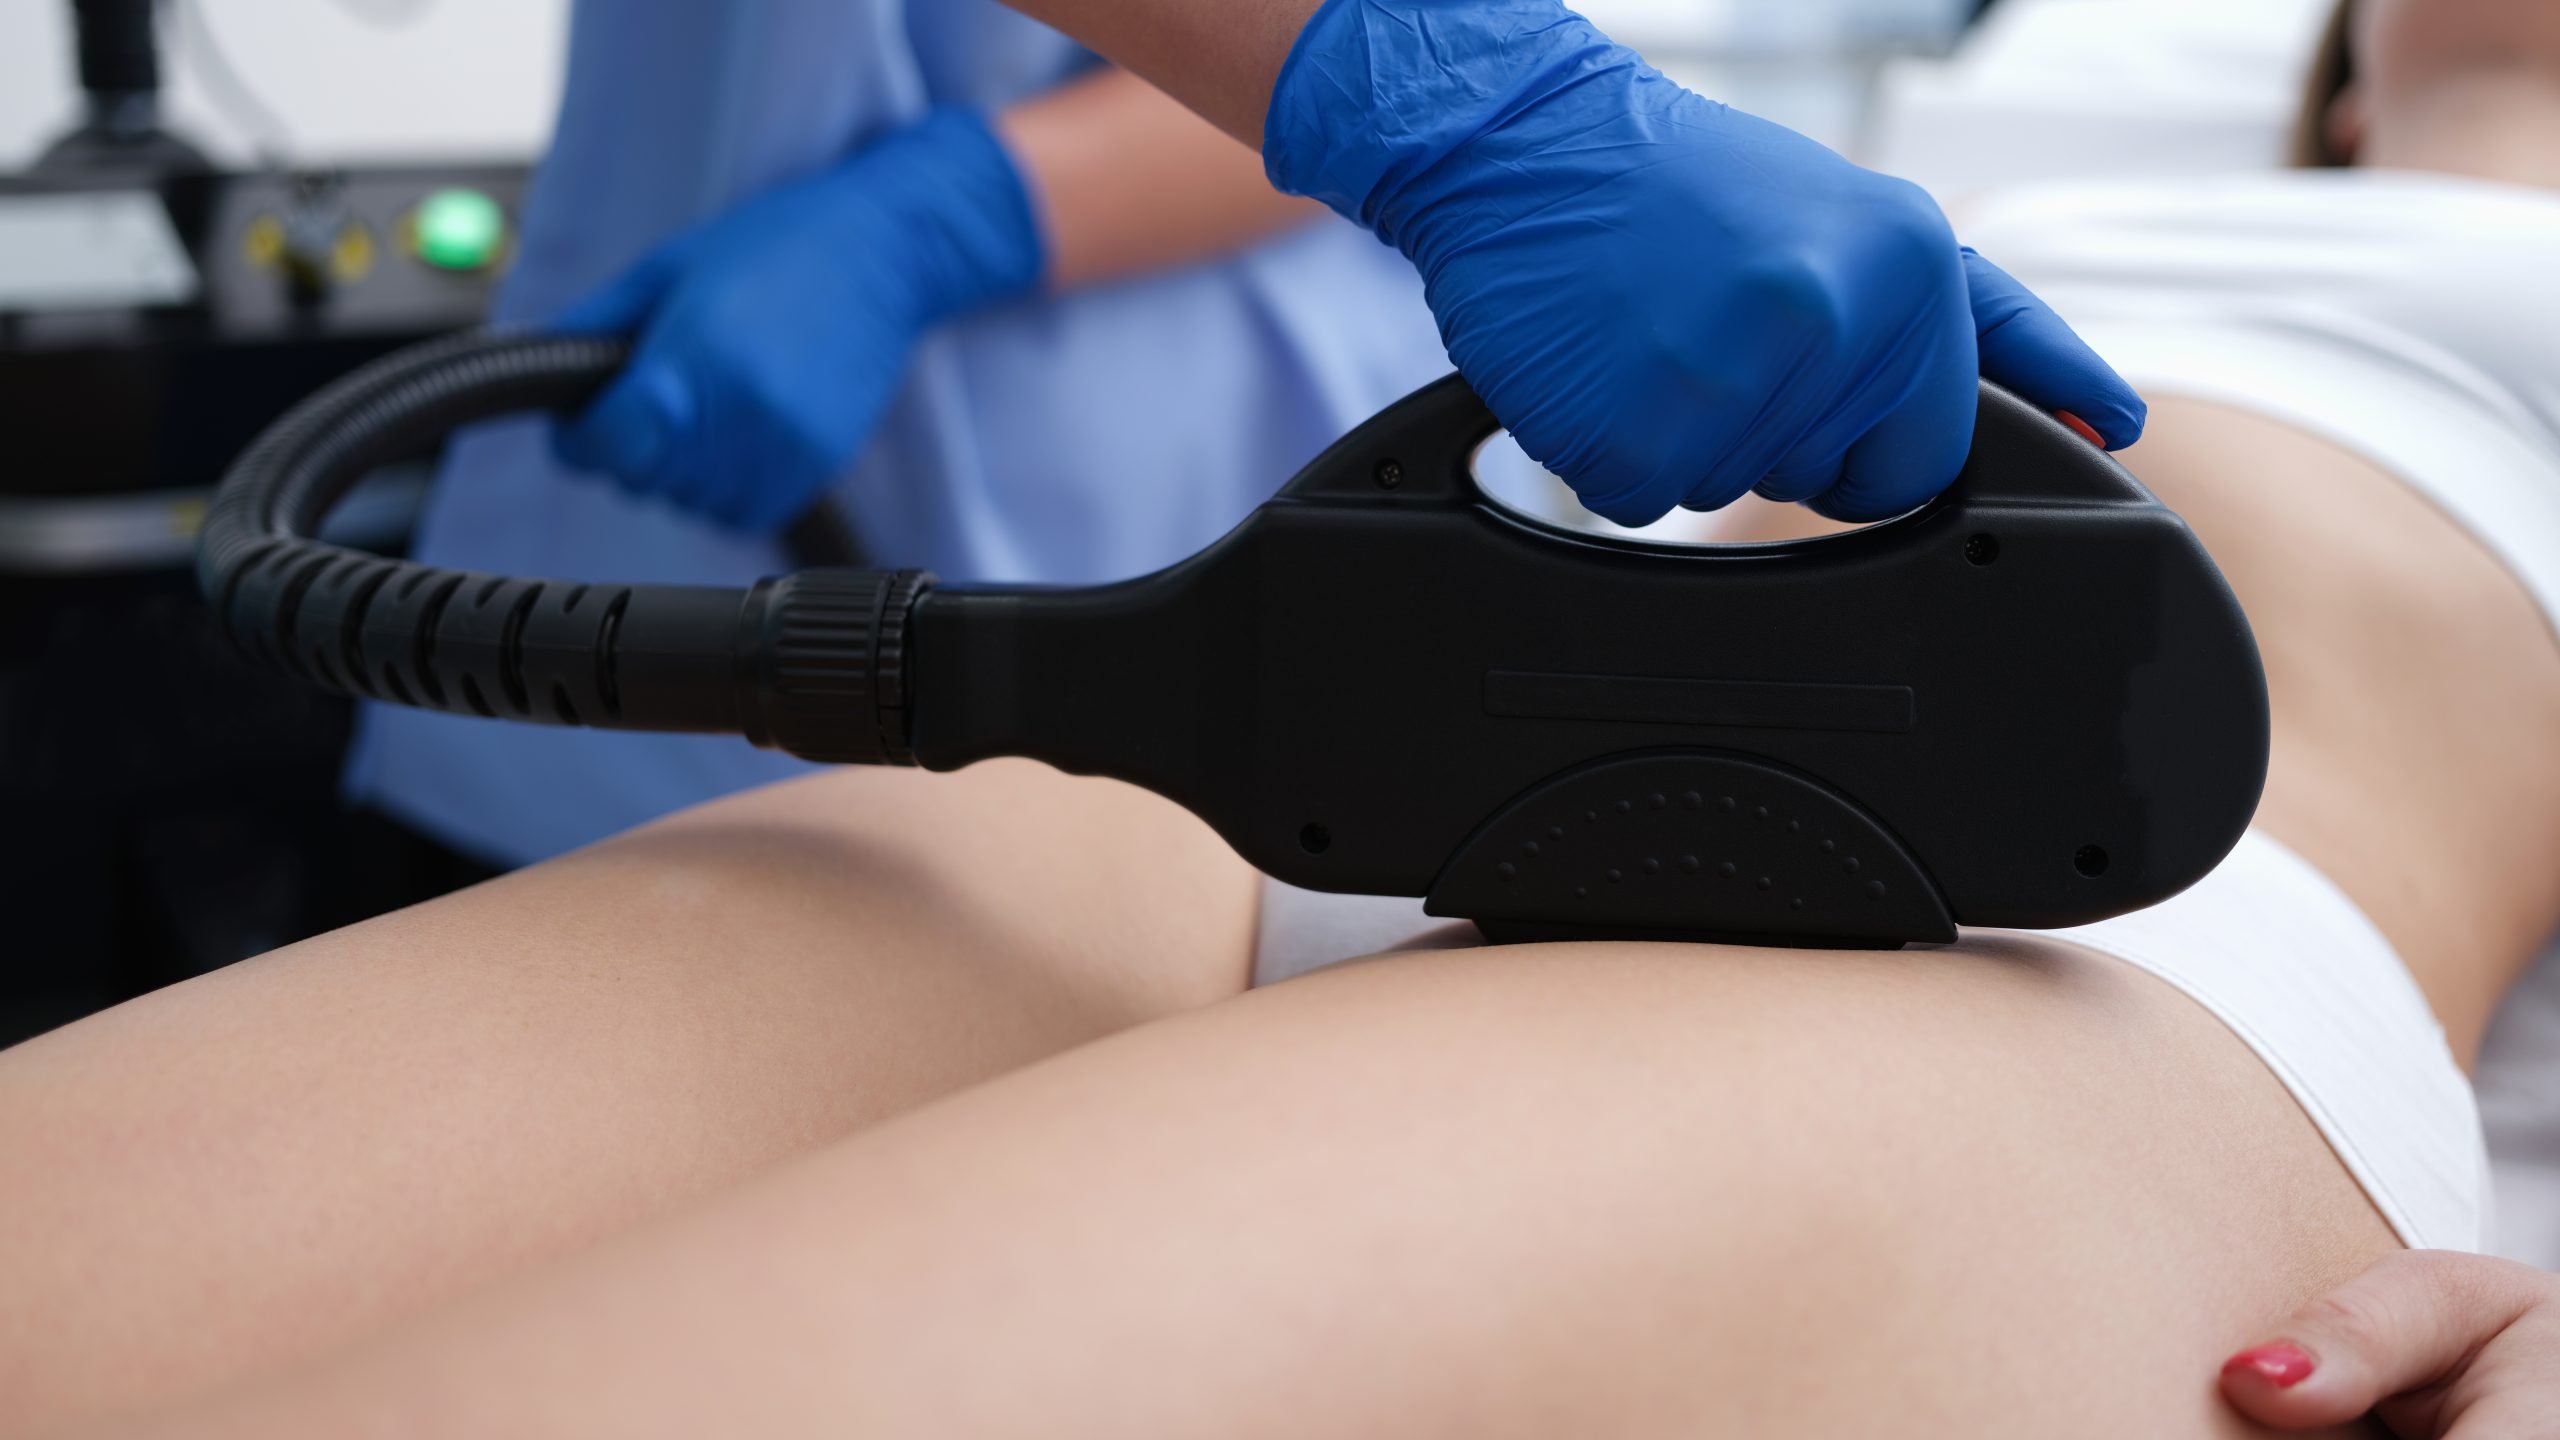 You are currently viewing Preparing for Bikini Laser Hair Removal: What to Expect Before, During and After the Treatment